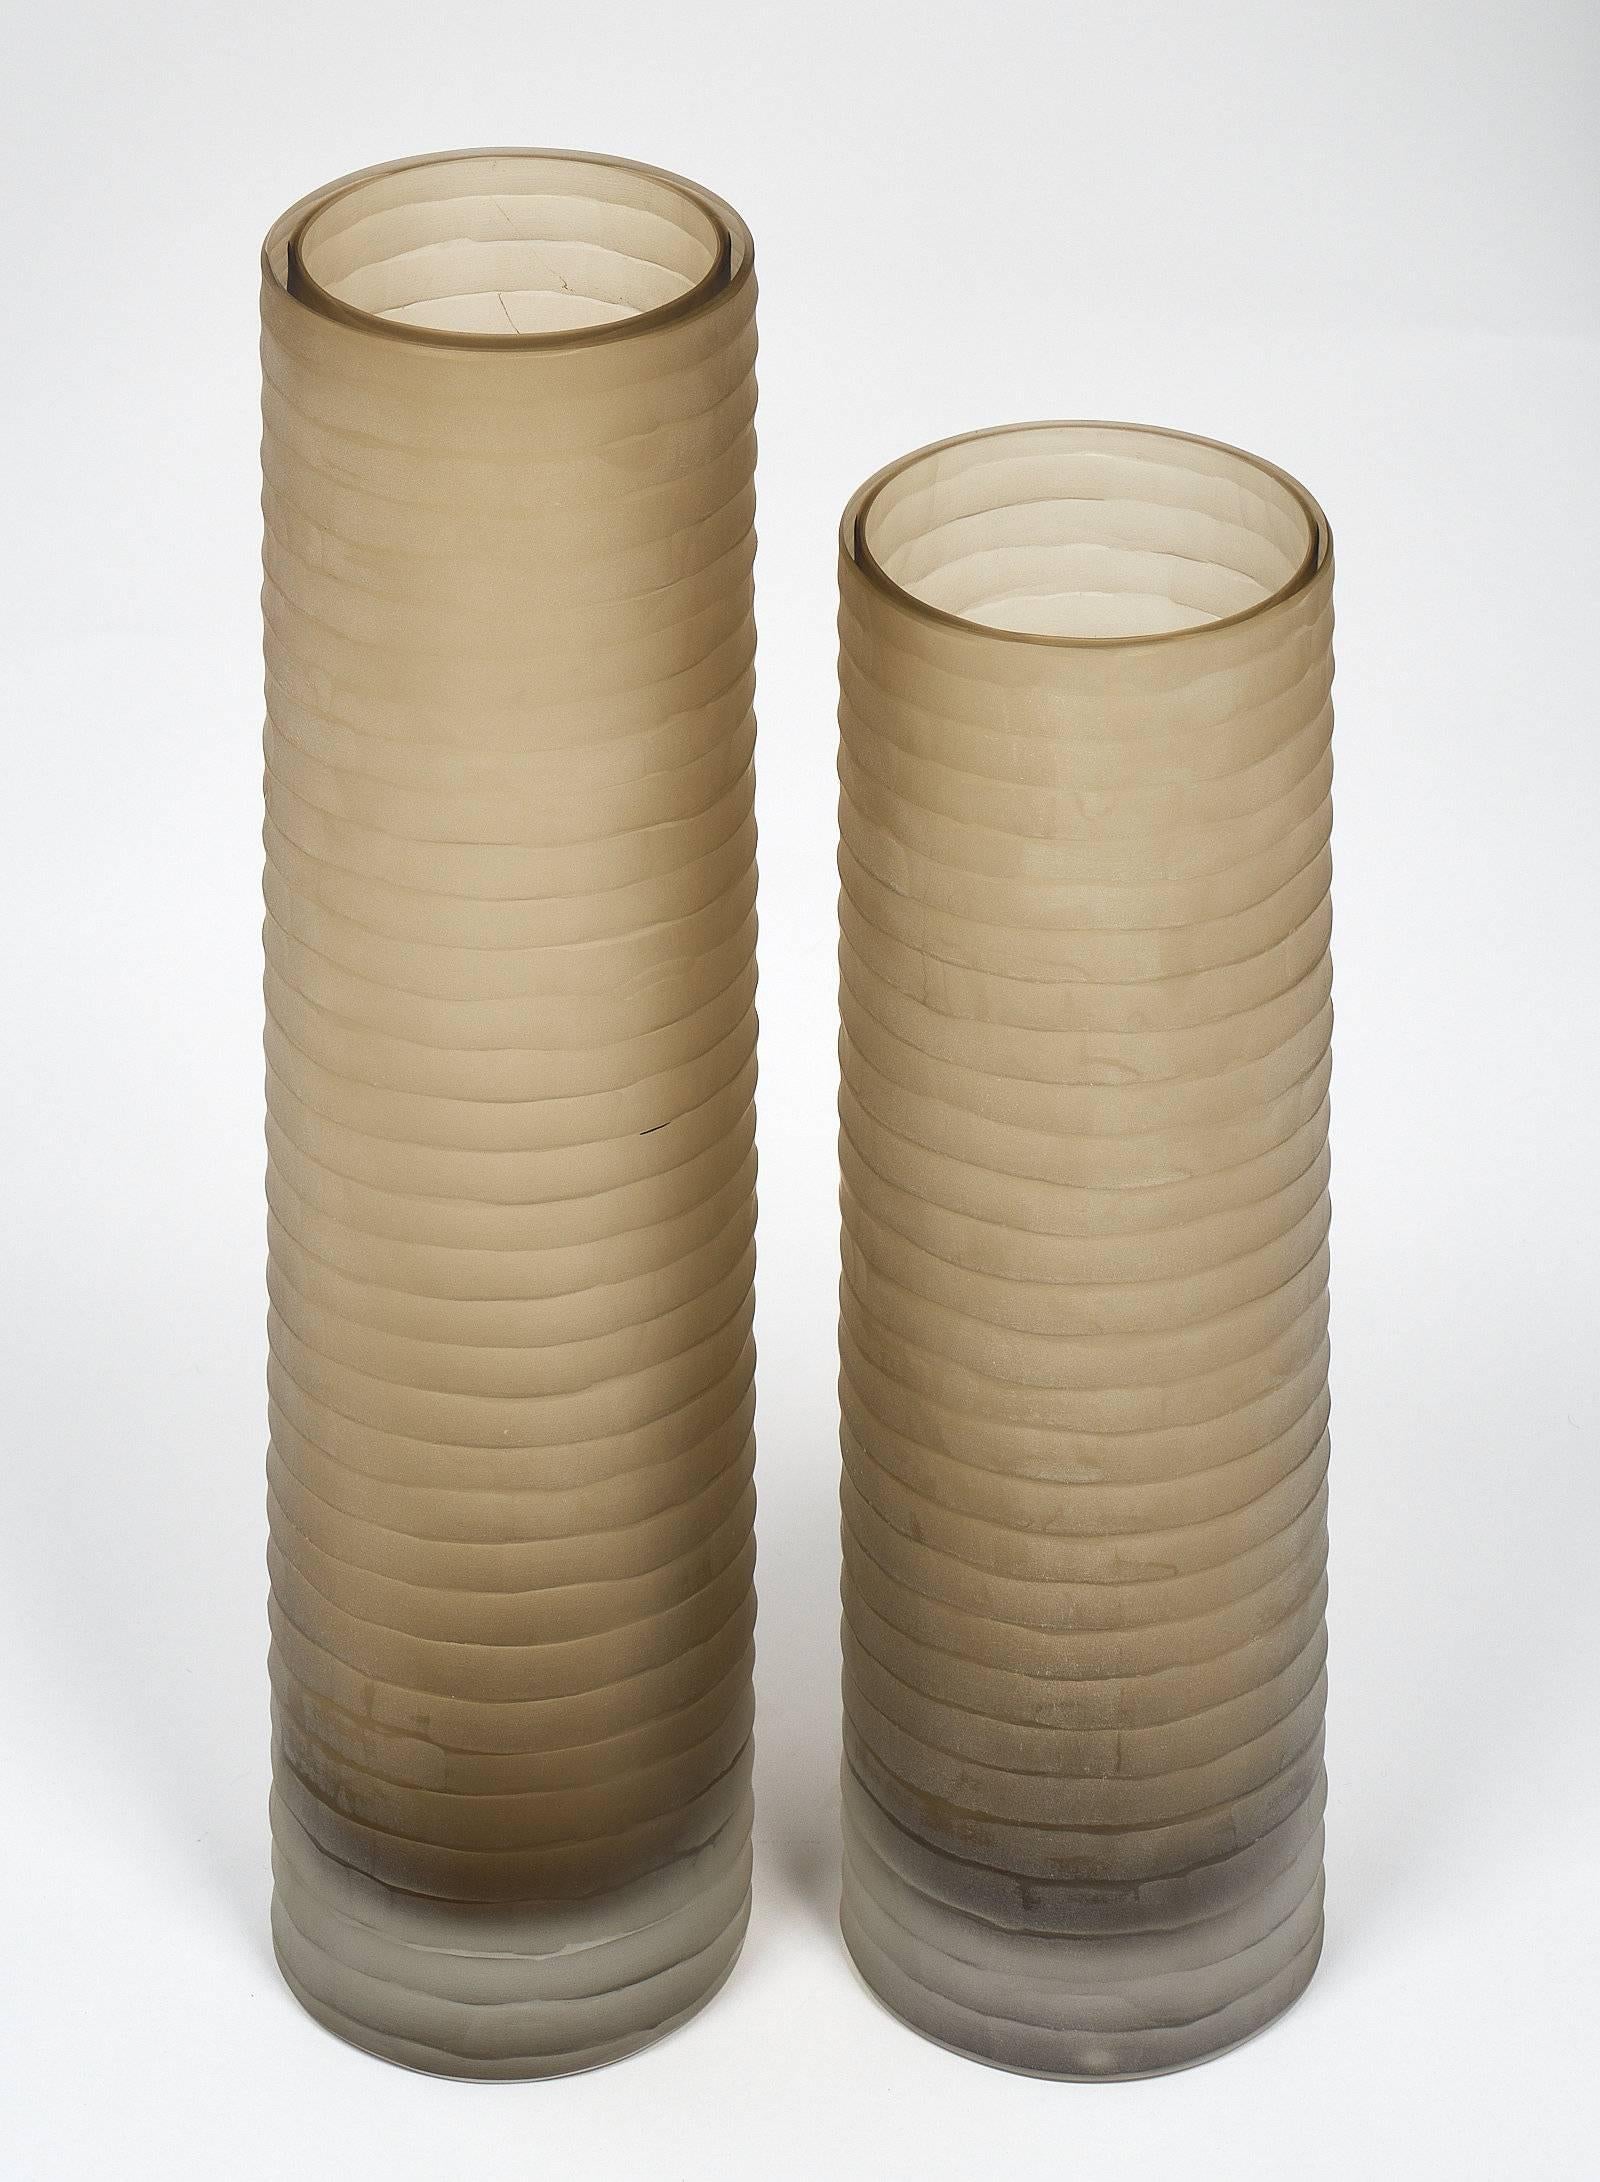 ‘Battuto’ Smoked Murano Glass Vases In Excellent Condition For Sale In Austin, TX